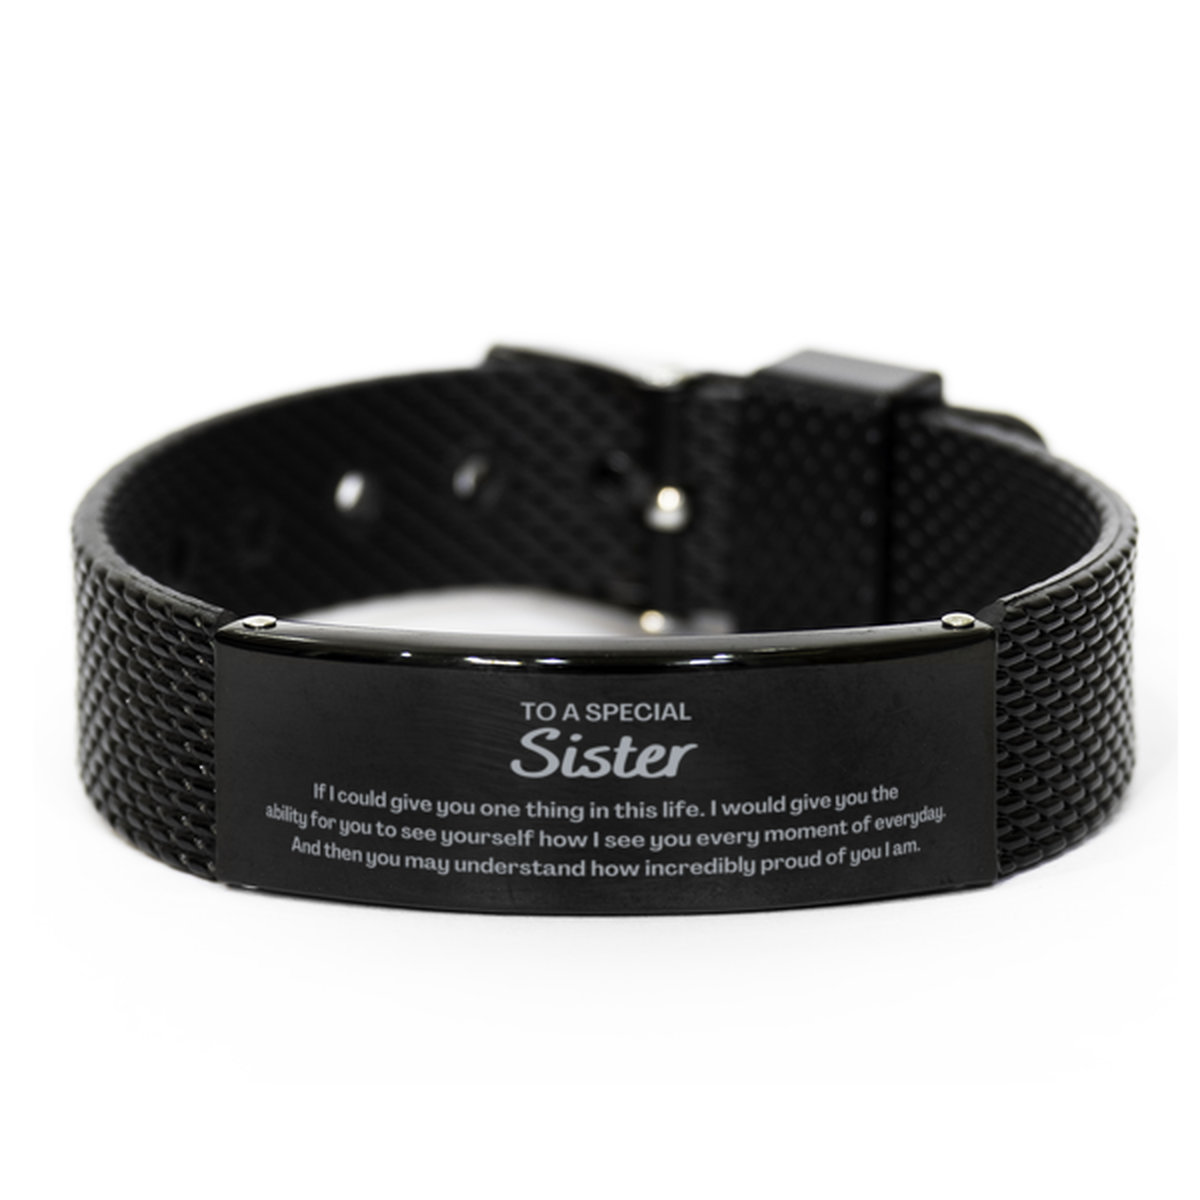 To My Sister Black Shark Mesh Bracelet, Gifts For Sister Engraved, Inspirational Gifts for Christmas Birthday, Epic Gifts for Sister To A Special Sister how incredibly proud of you I am